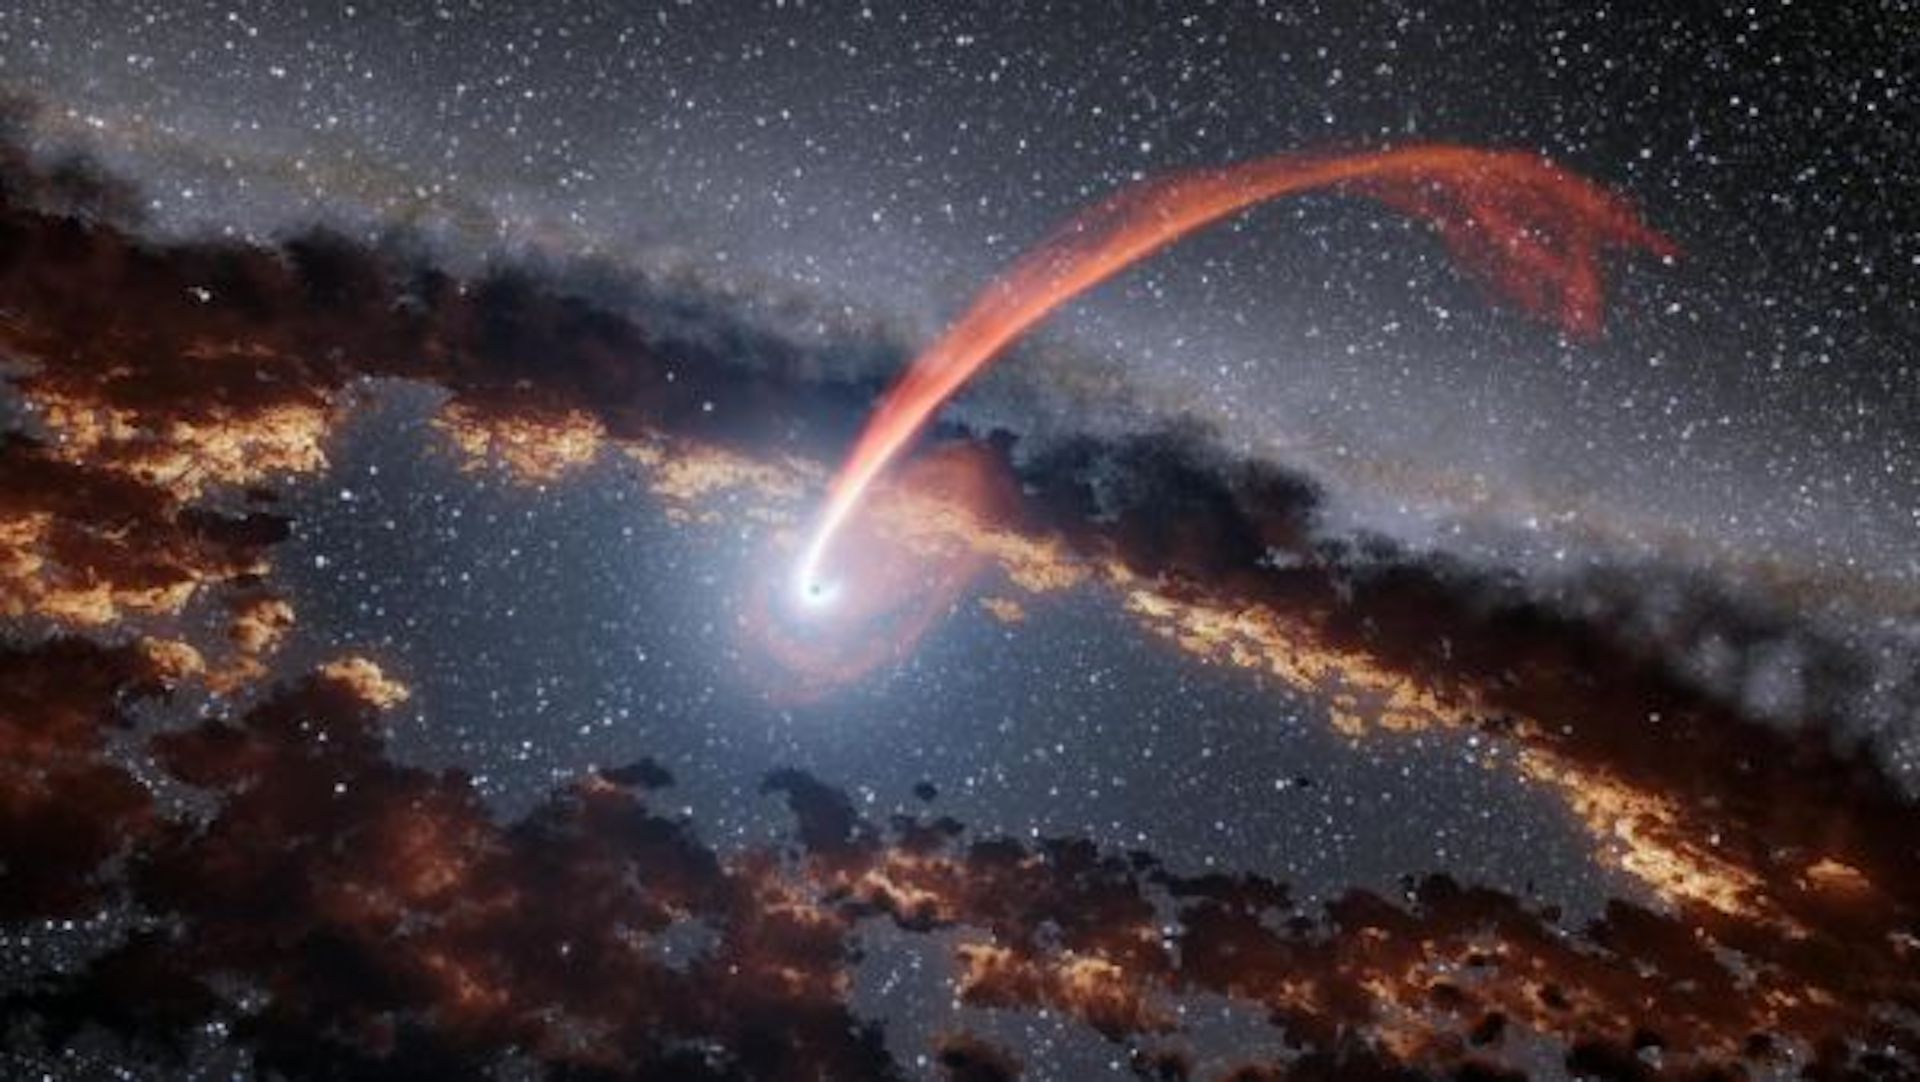  Scientists discover closest star-shredding black hole to Earth ever seen 